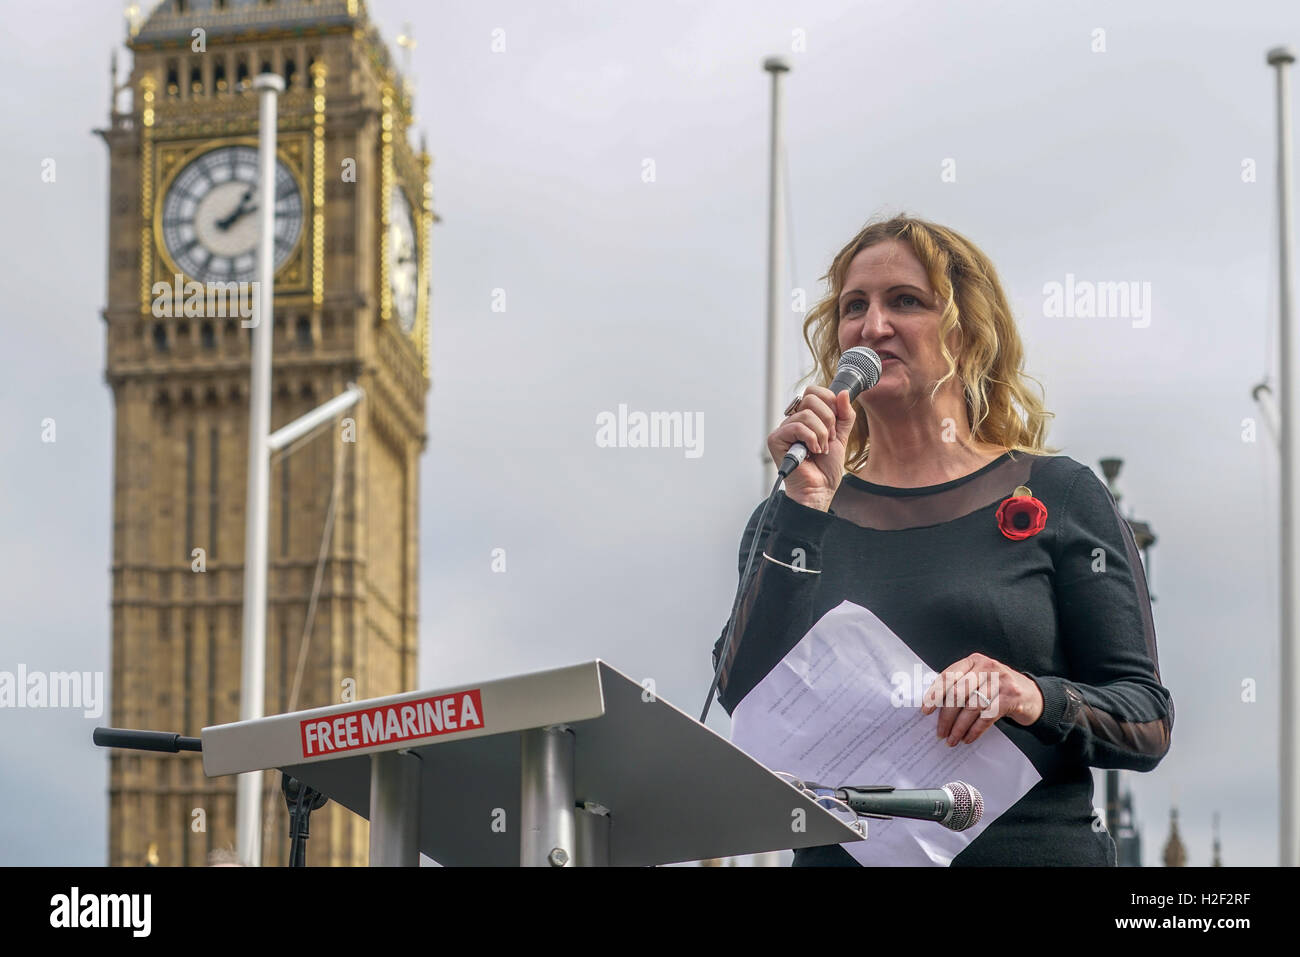 London, England,UK. 28th Oct 2016: Claire Blackman WIFE OF MARINE ‘A’ attends Parliament Square in support of jailed Sgt Alexander Blackman who was convicted of murdering a Taliban fighter in 2013, London ,UK. Credit:  See Li/Alamy Live News Stock Photo